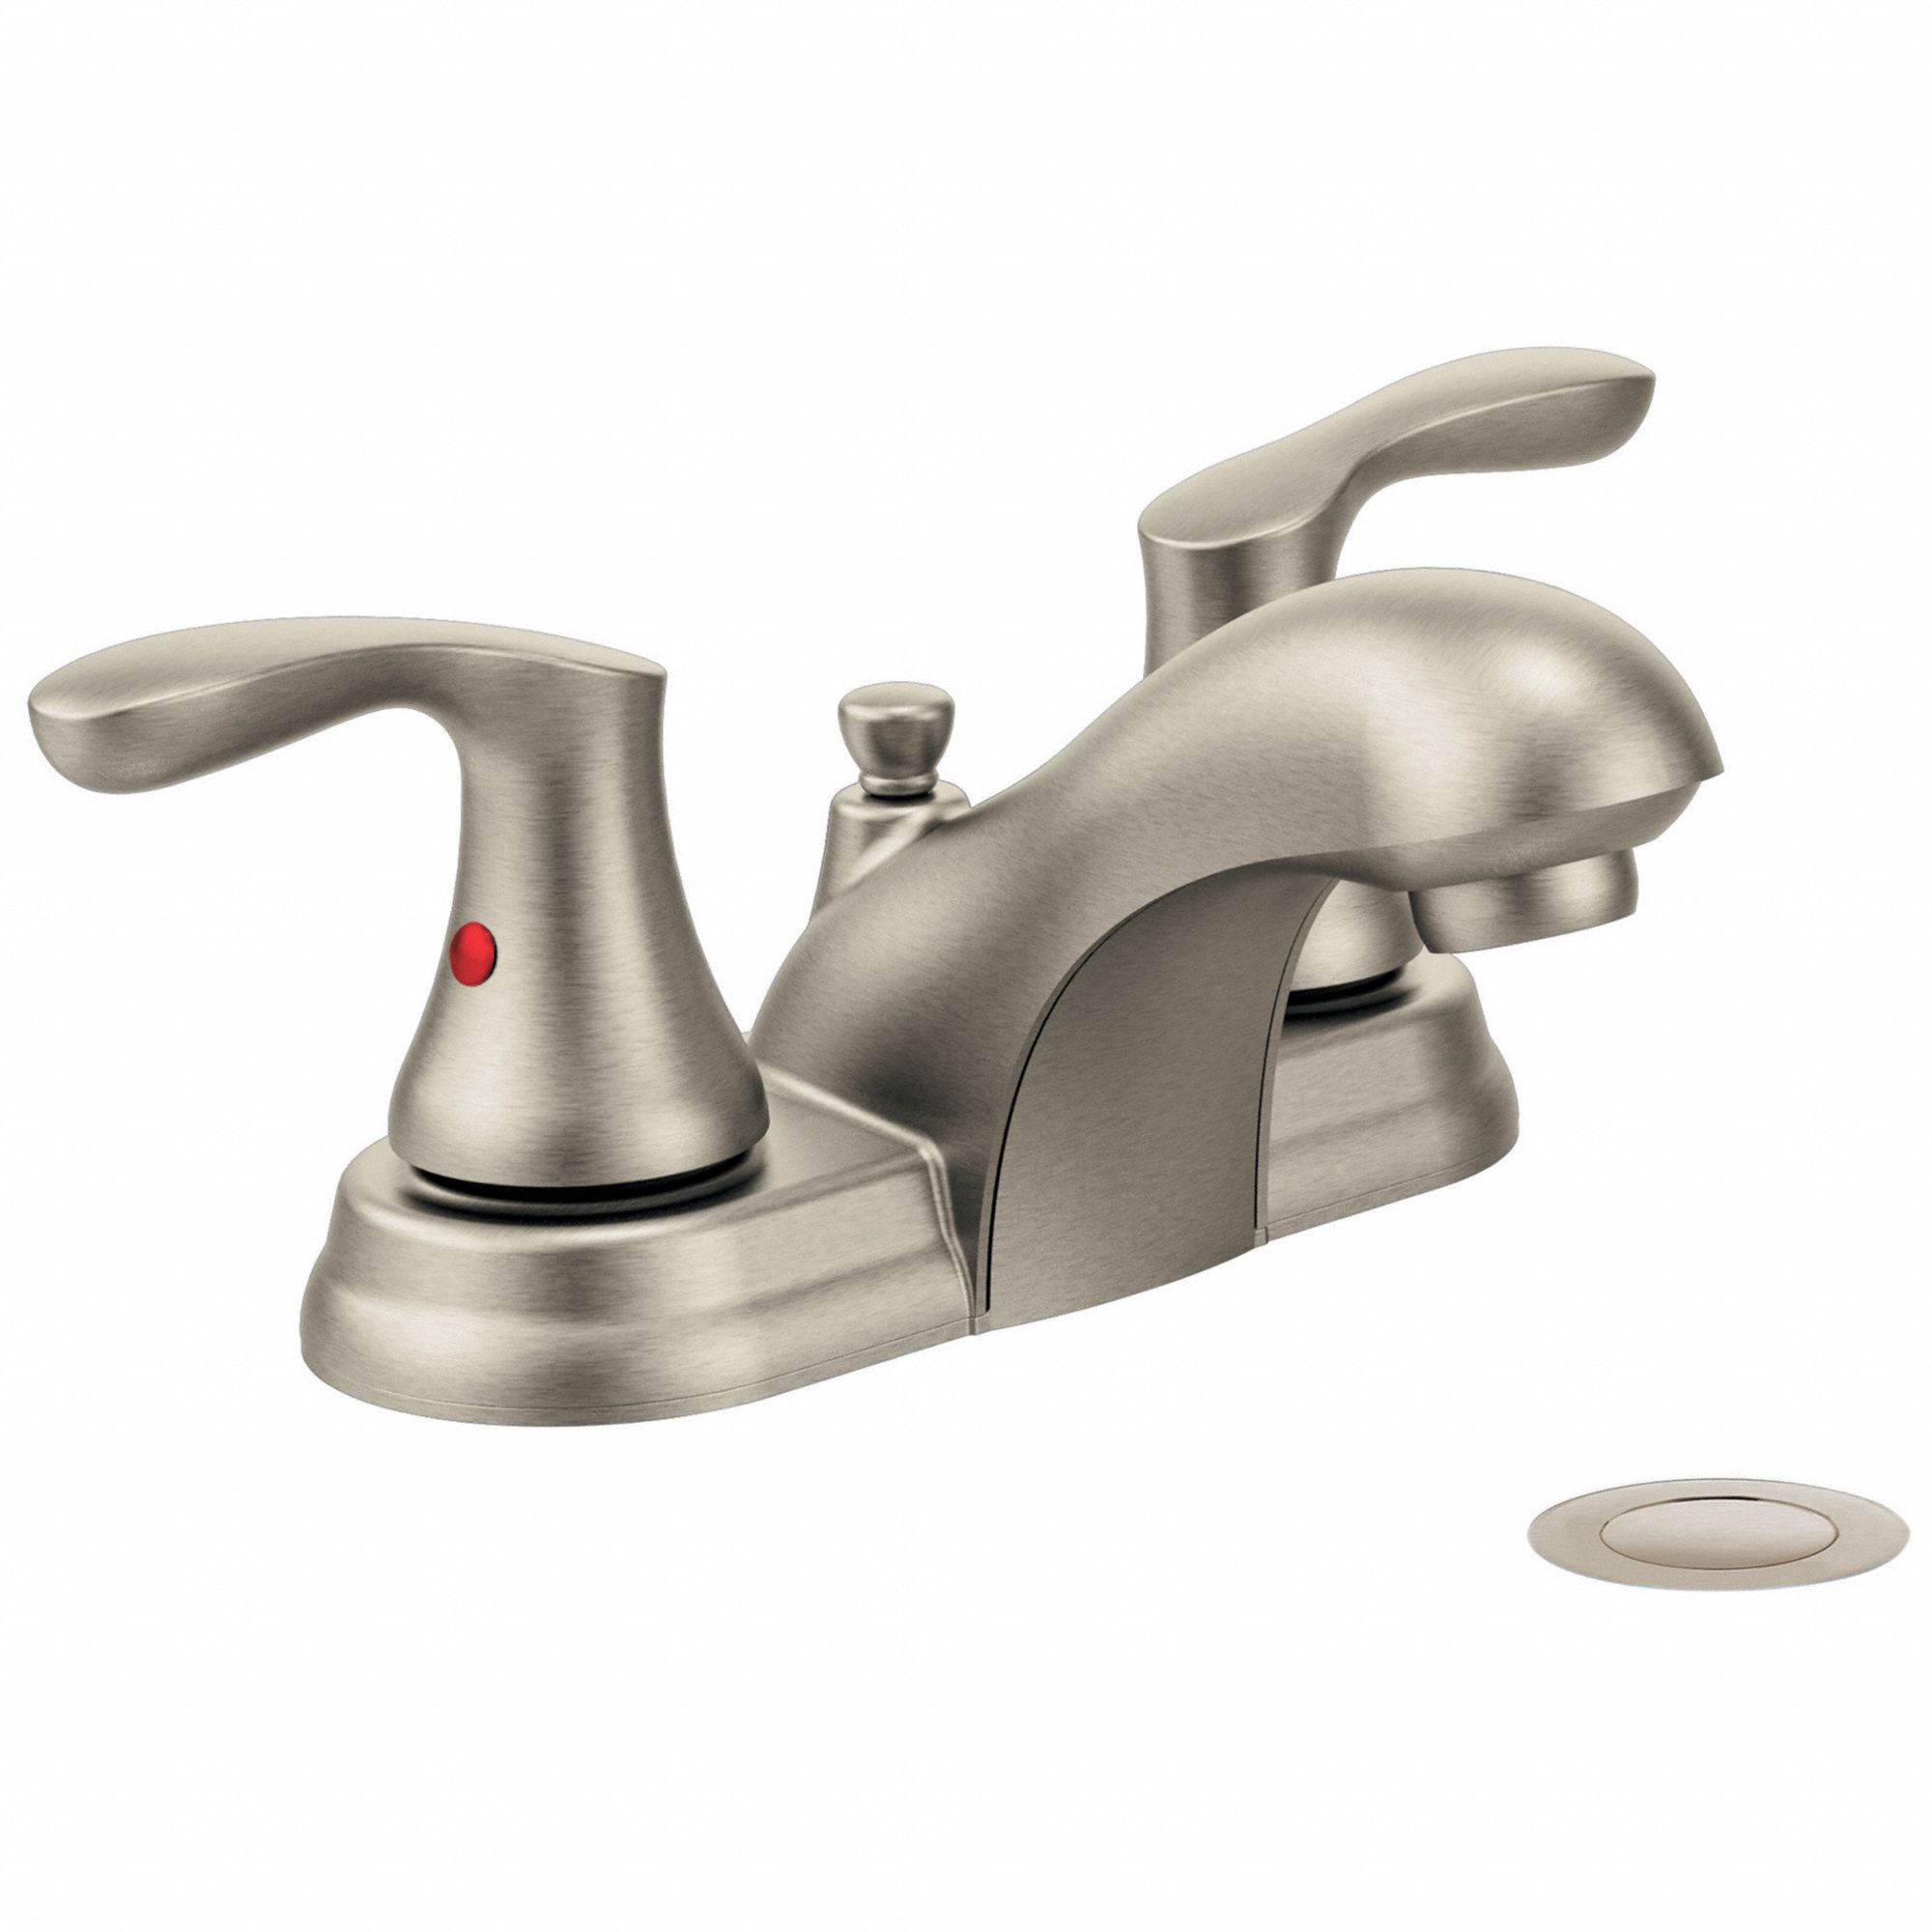 Bathroom Faucet: Cornerstone®, Brushed Nickel Finish, 1.5 gpm Flow Rate